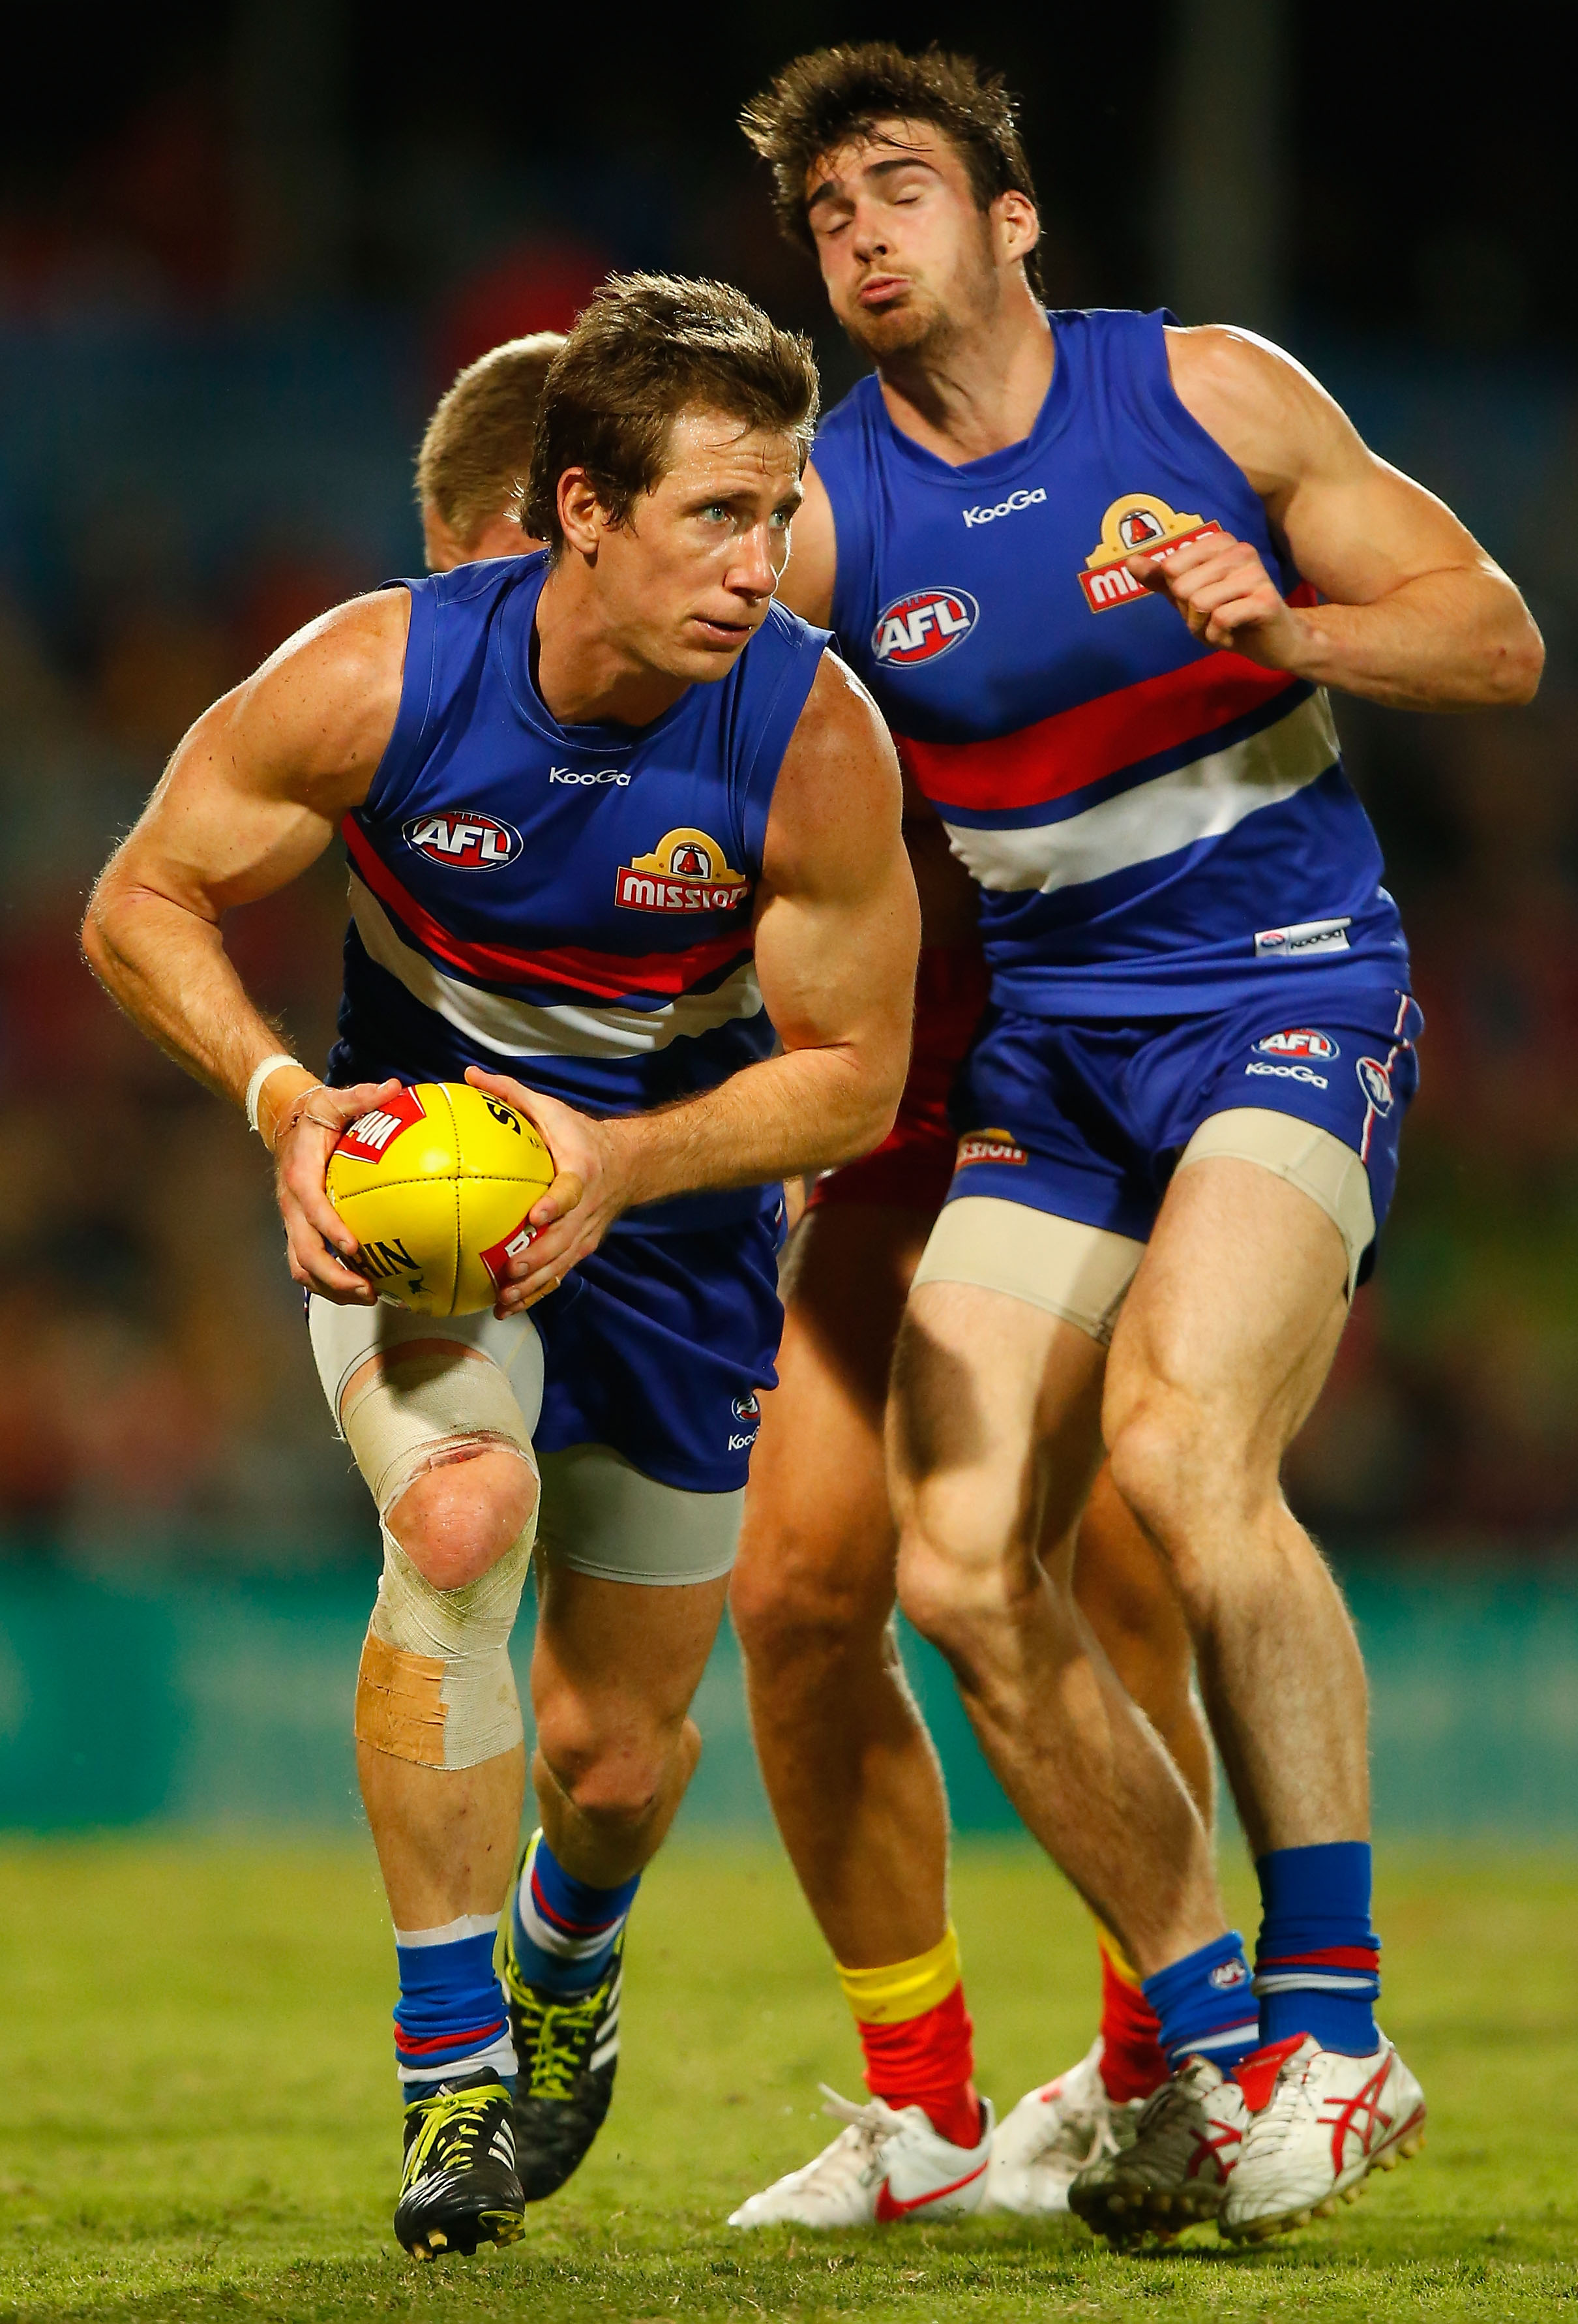 Veteran Bulldog signs on for another year - AFL.com.au